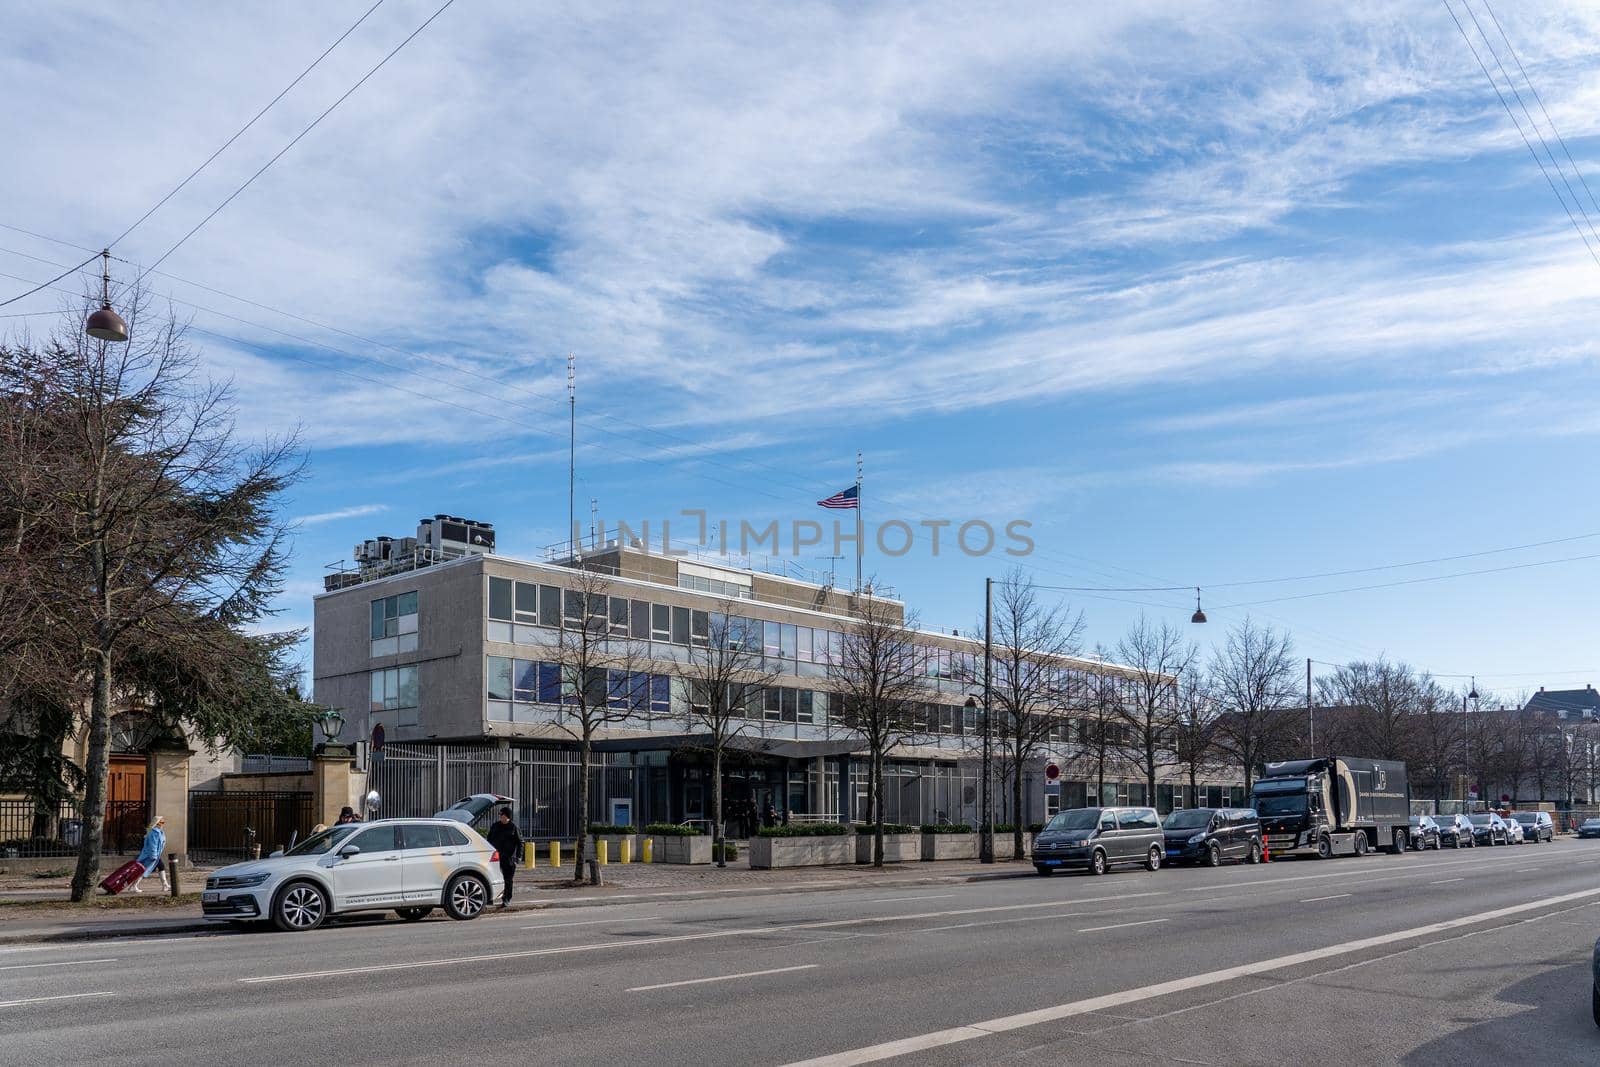 Copenhagen, Denmark. - March 1, 2022: Exterior view of the Embassy of the United States.